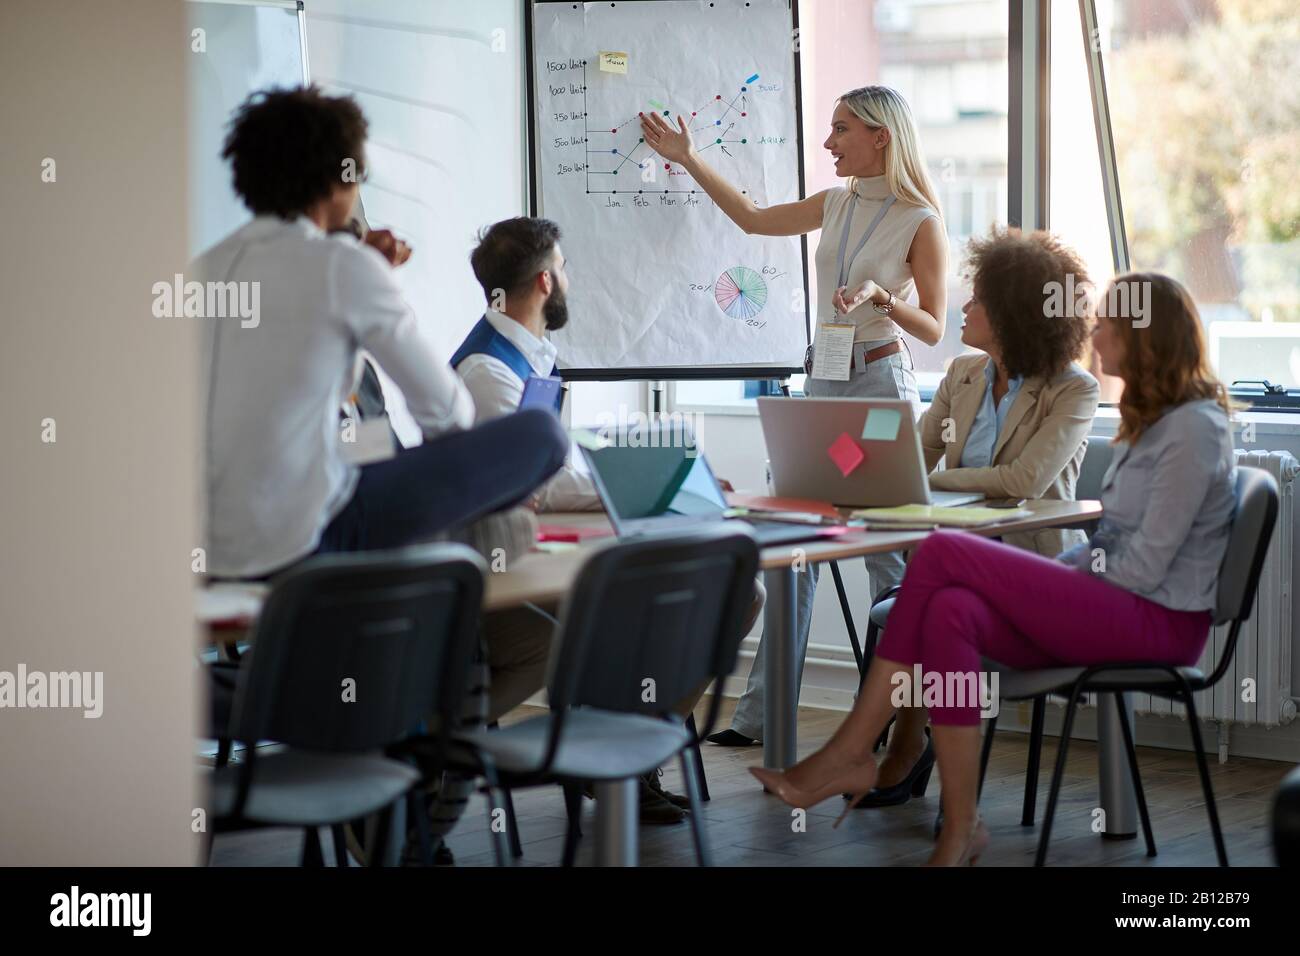 business female showing stats on whiteboard to a group coworkers. business, meeting, casual briefing concept Stock Photo